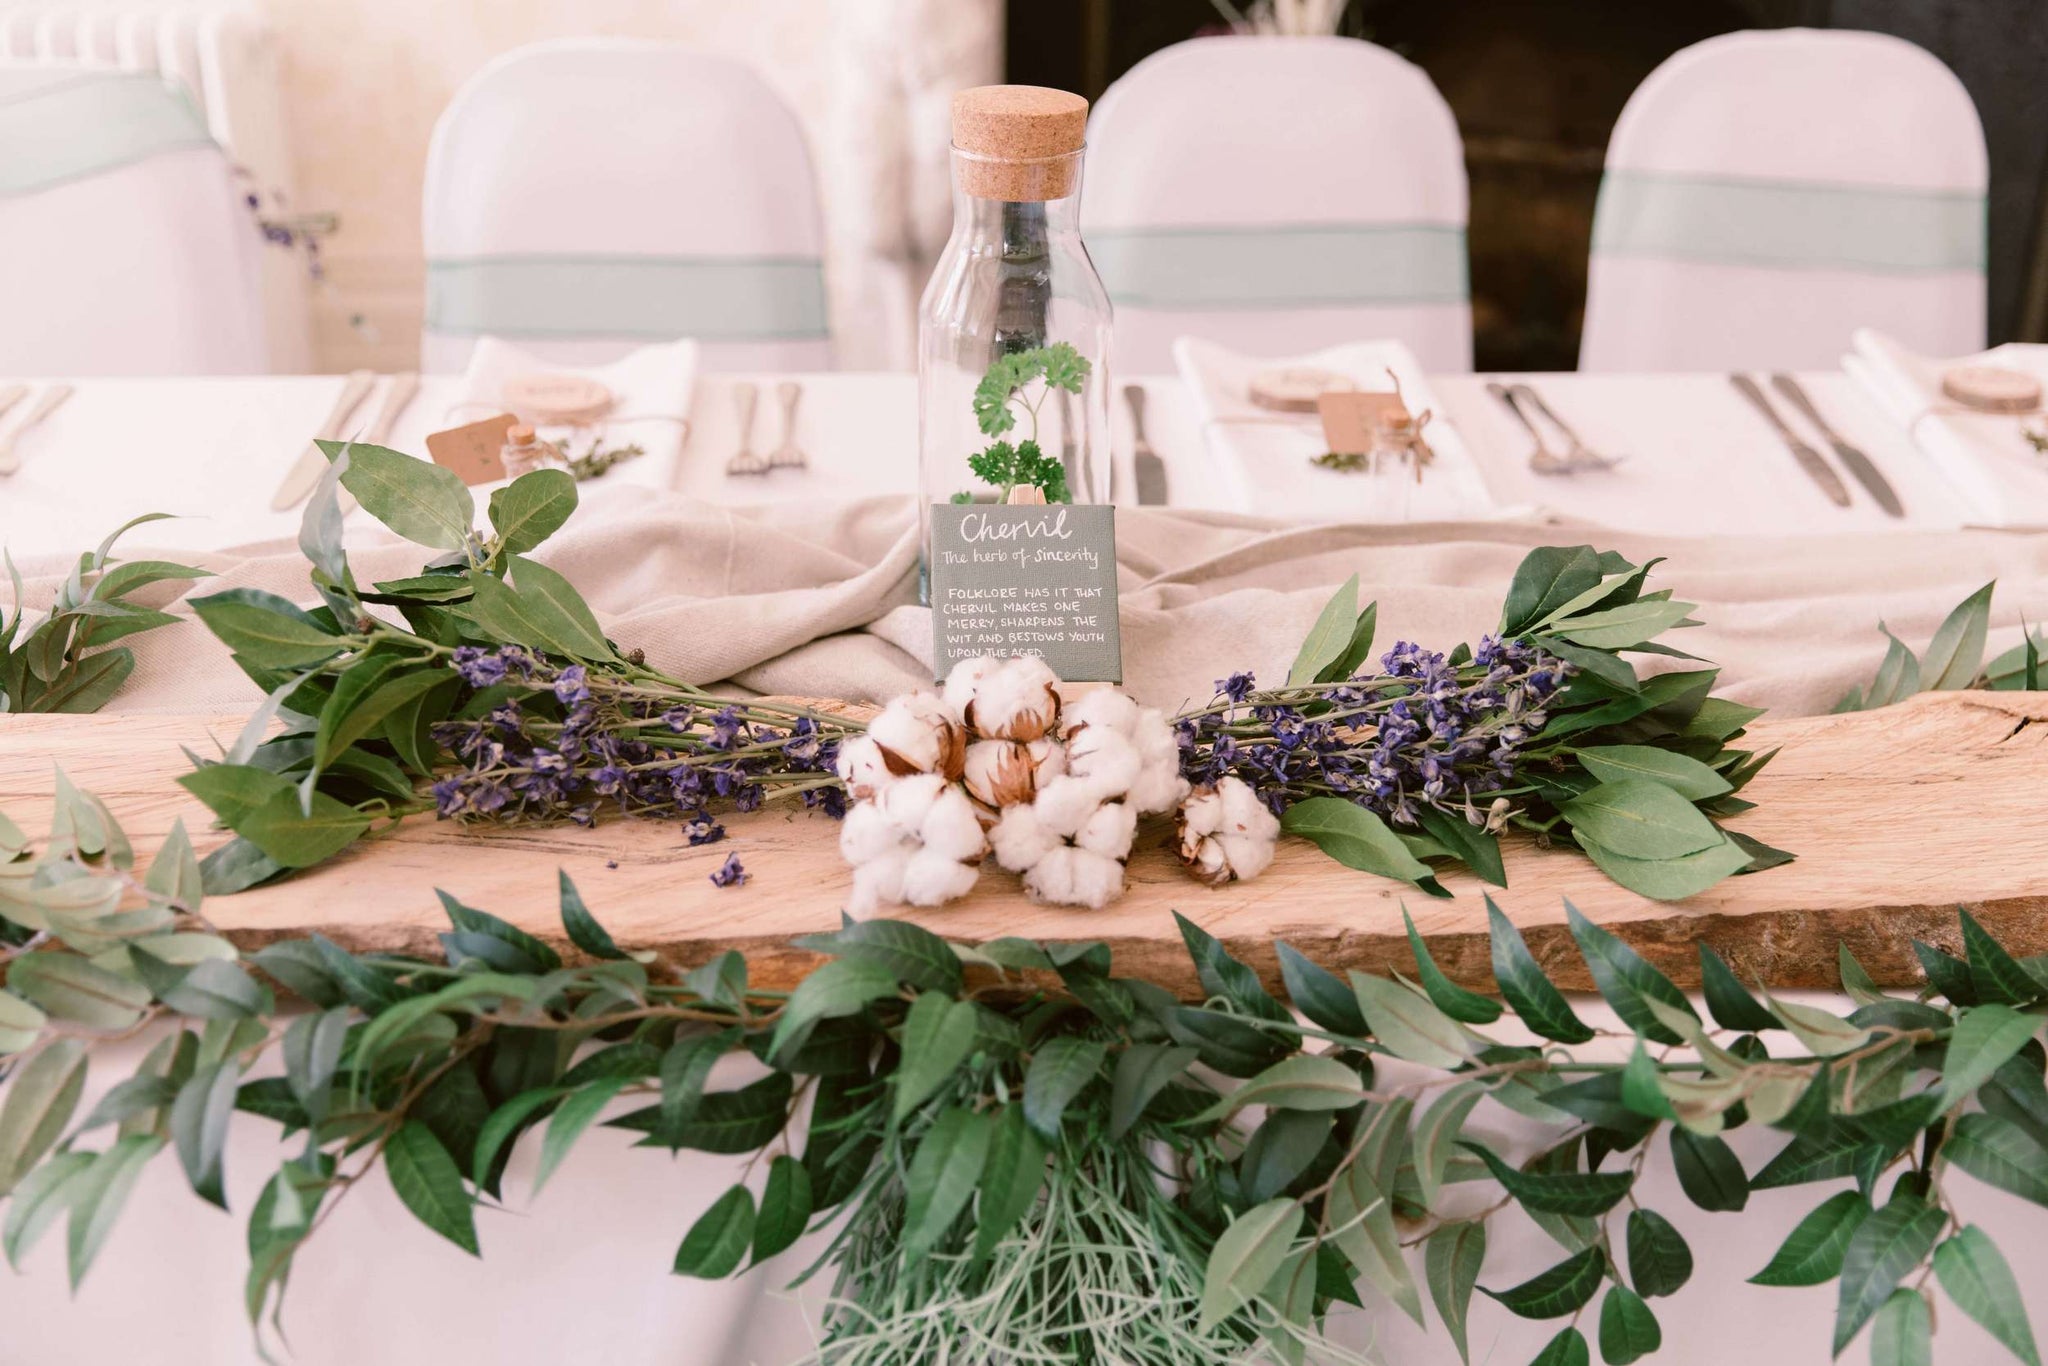 Rustic table decor with a central wooden beam, green eucalyptus leaves, cotton stems, and lavender, accompanied by a personalized bottle centerpiece.